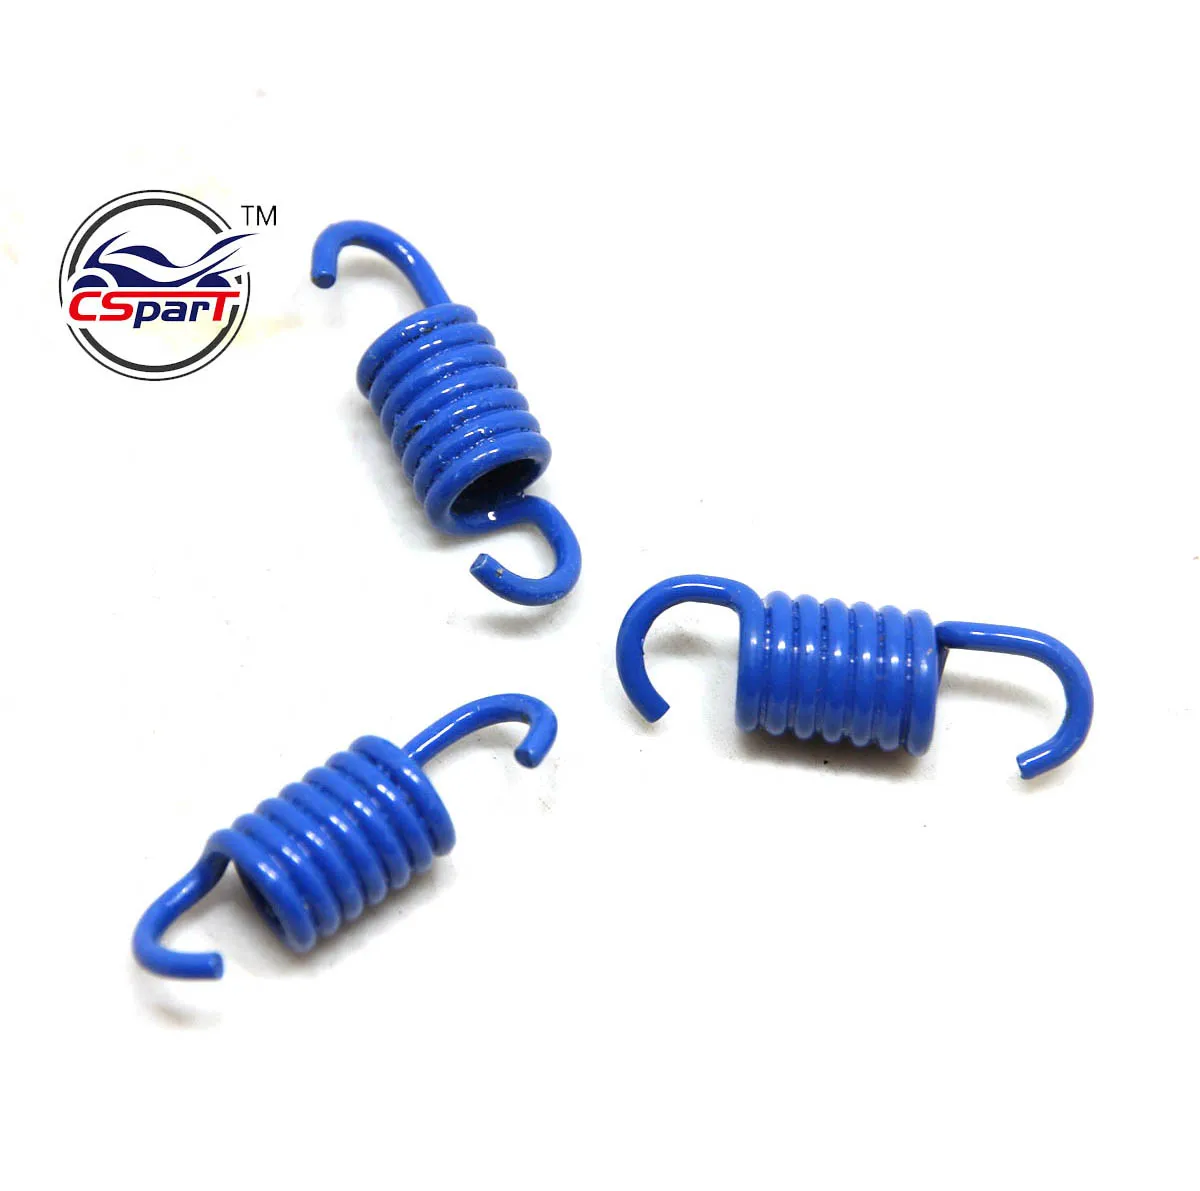 1k RPM  Clutch Spring Racing Performance GY6 125 150 Scooter Moped 152QMI 157QMJ